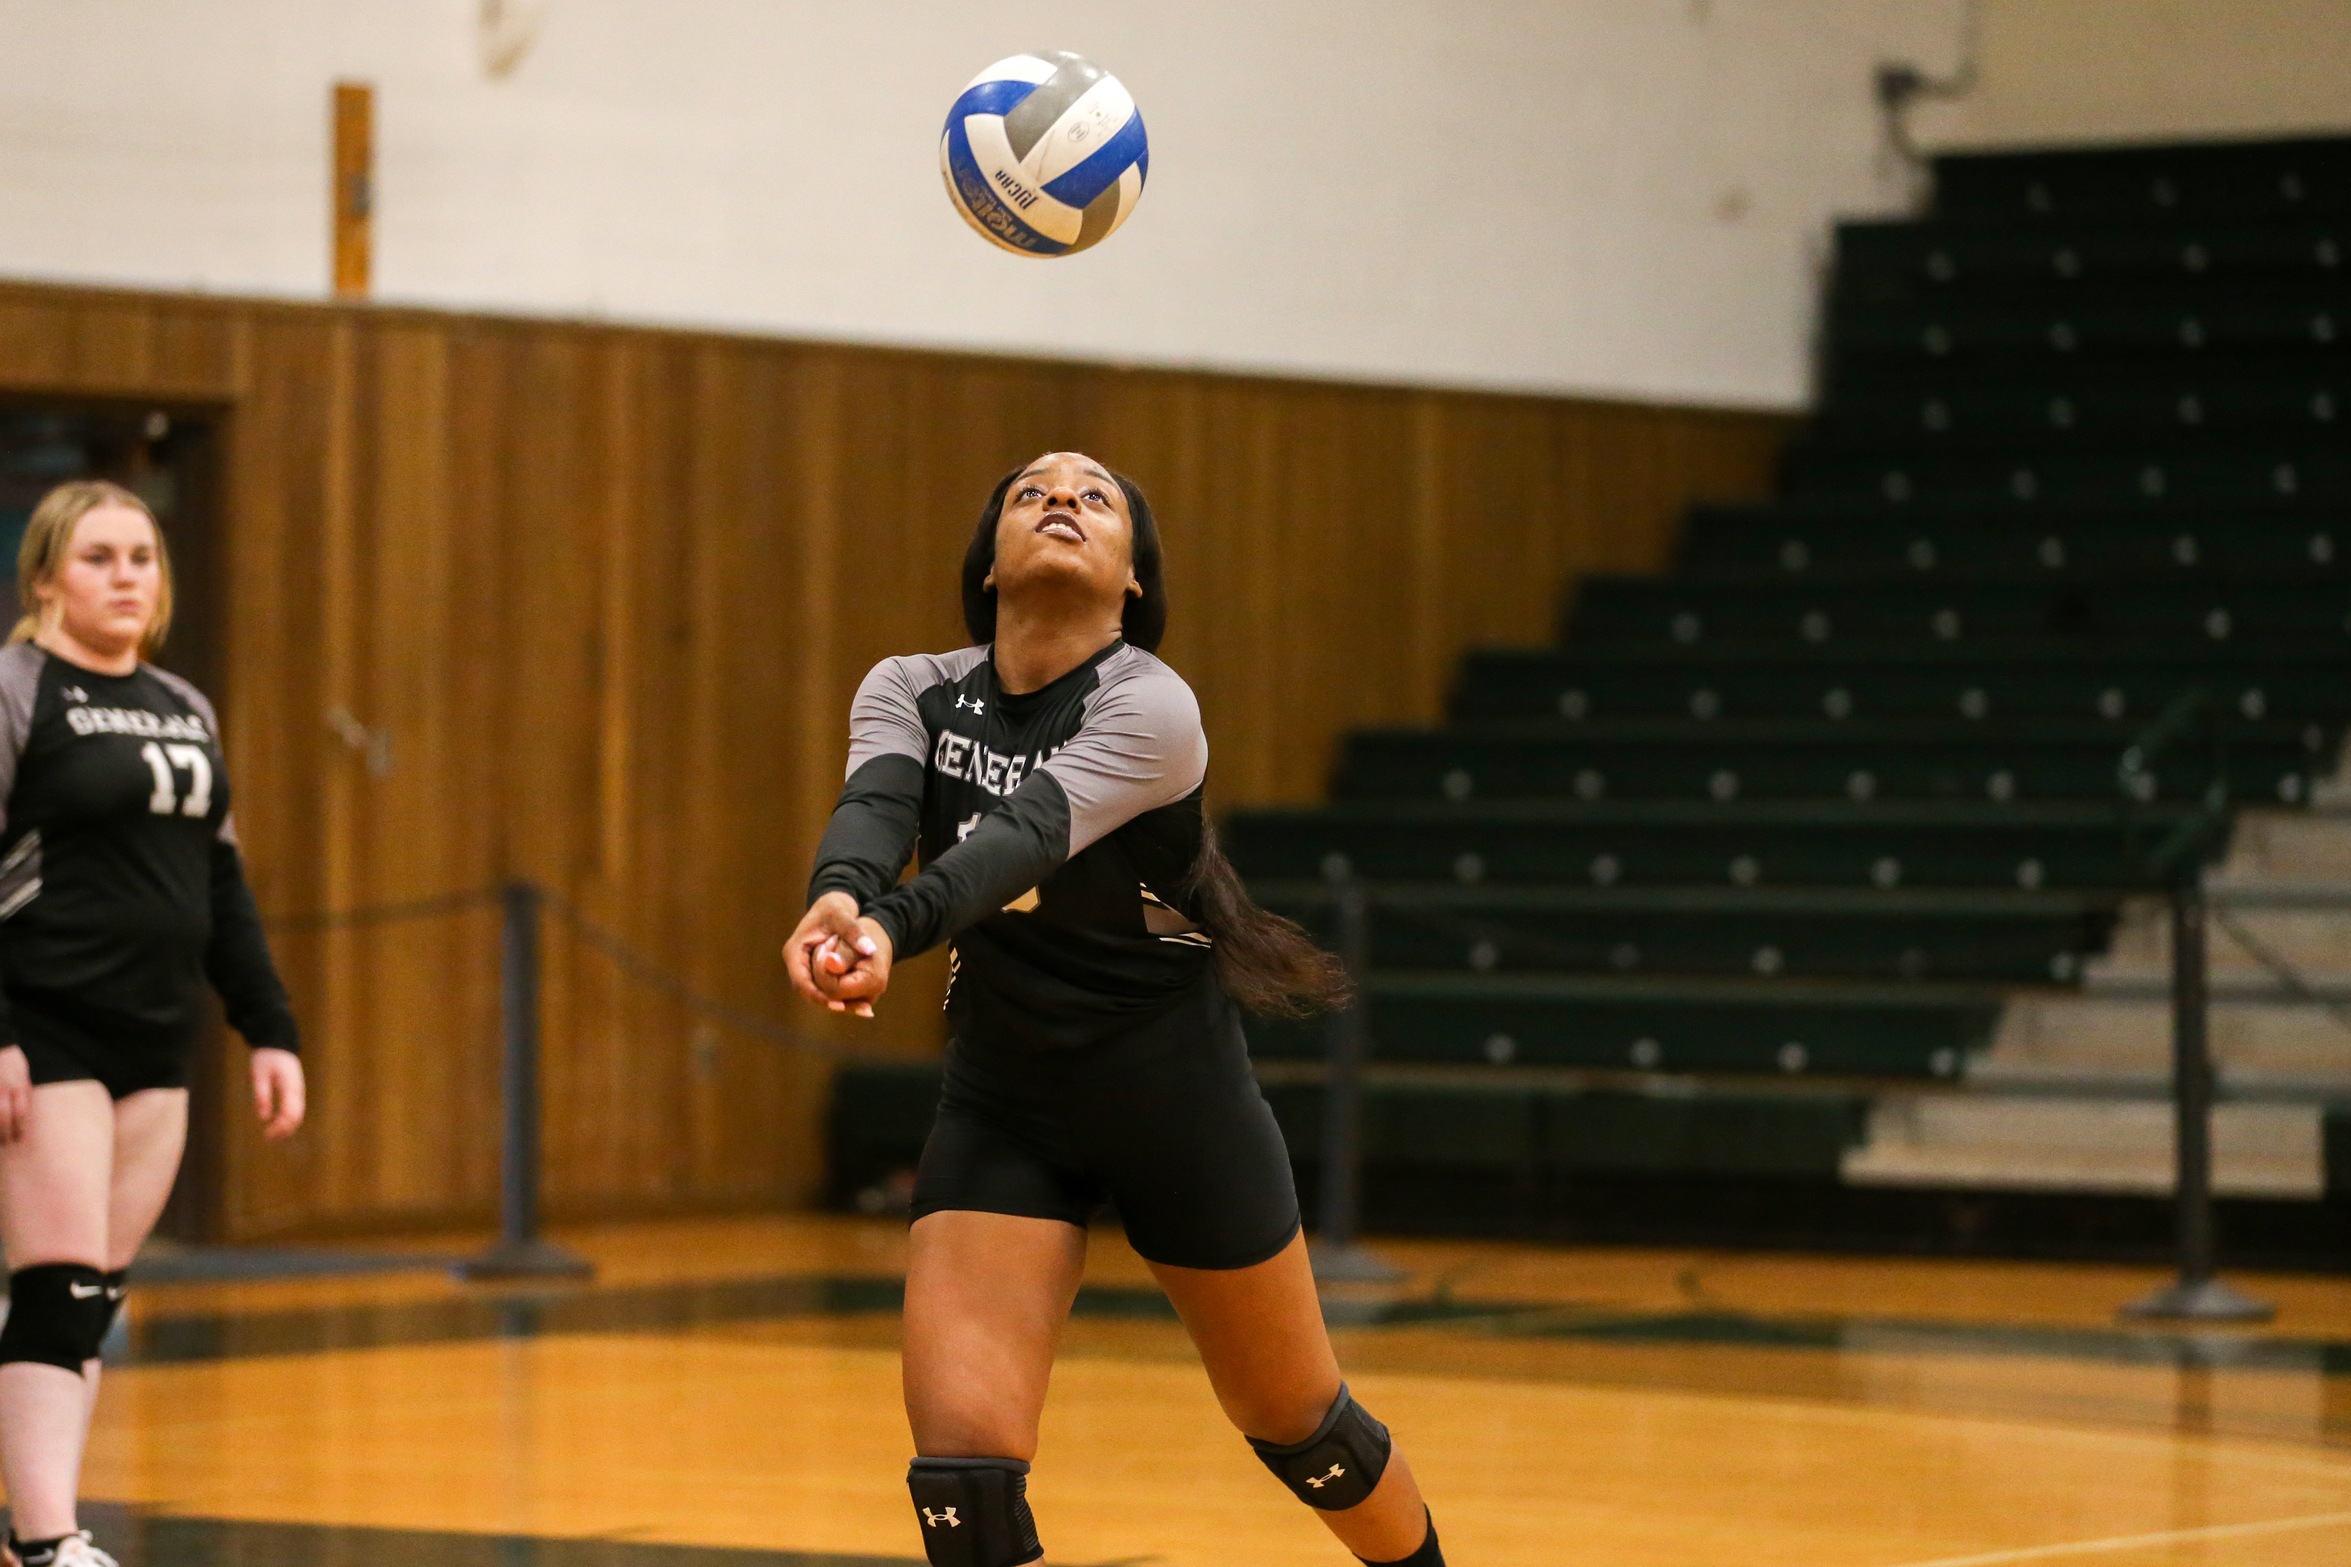 Generals Volleyball Earns Split at Mohawk Valley POD